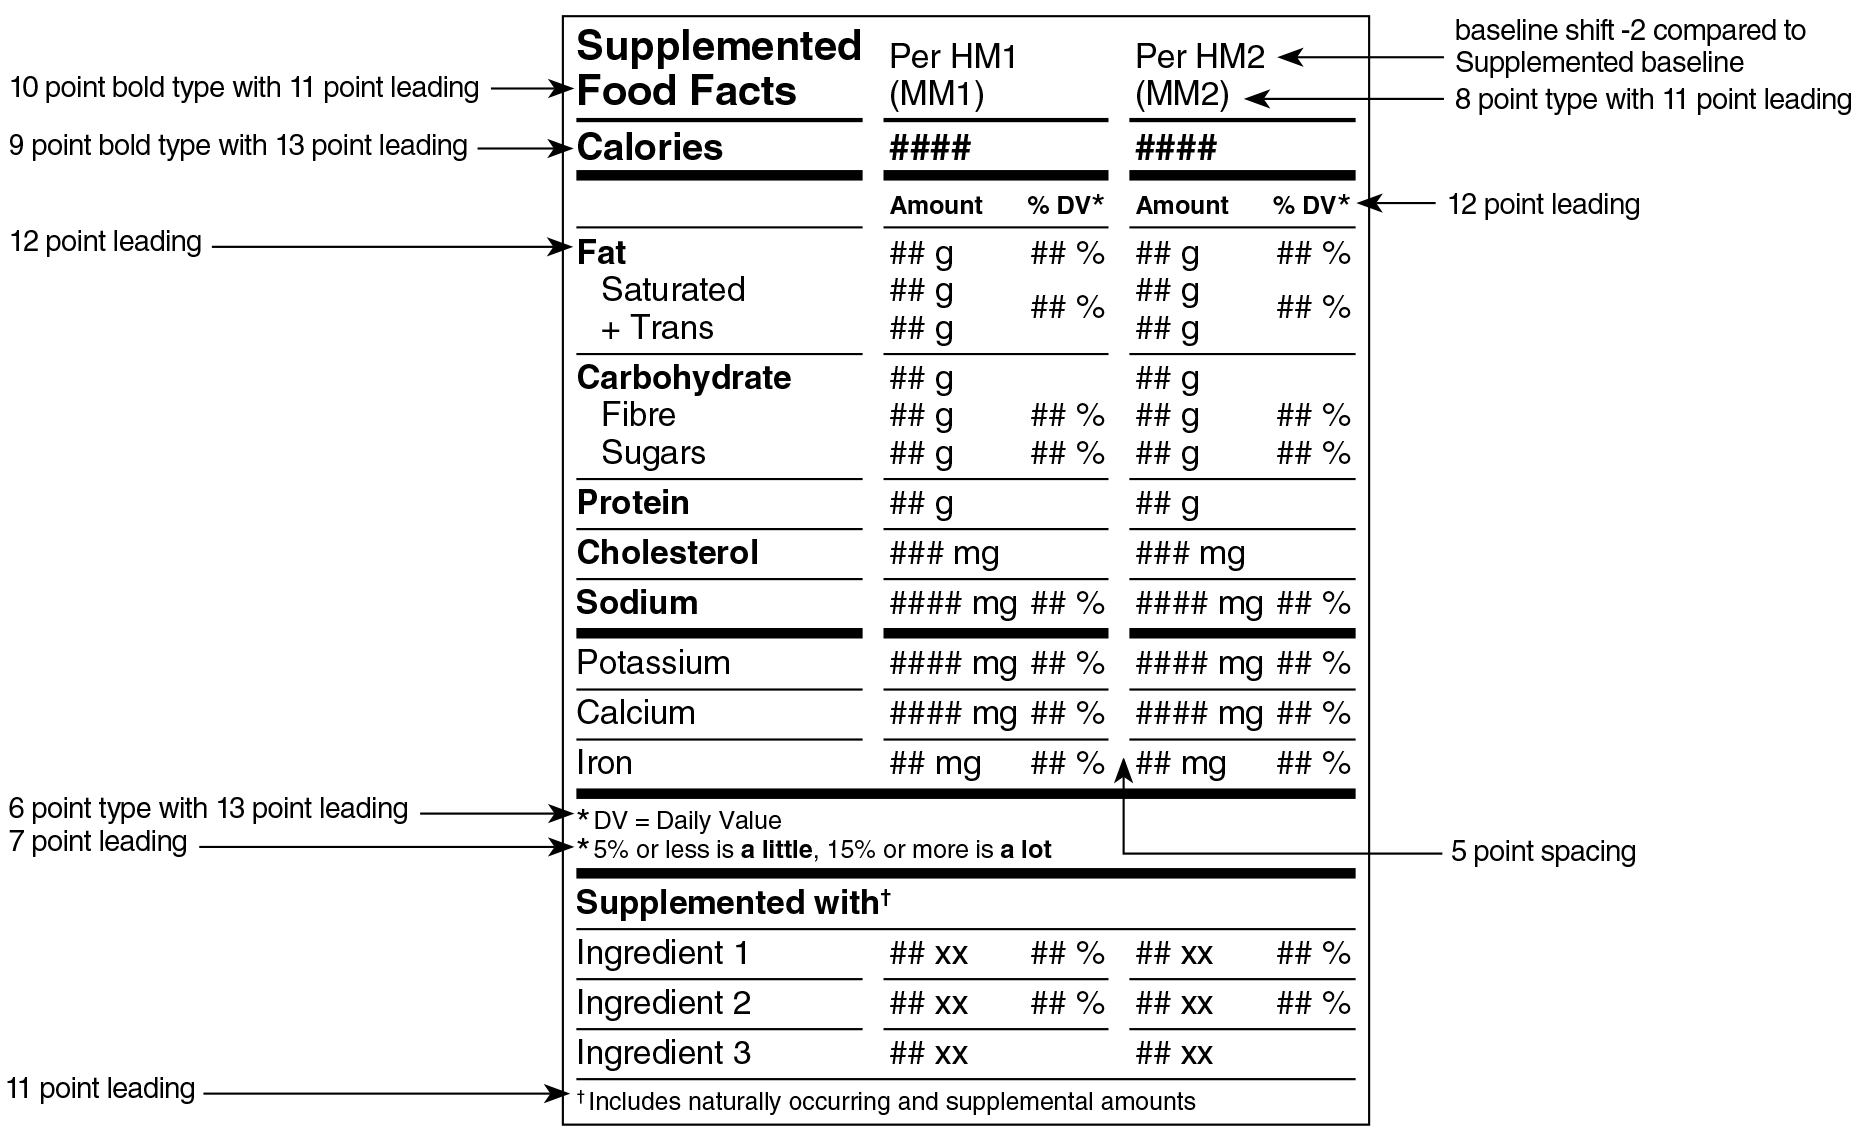 An English Supplemented Food Facts table in aggregate format for two serving sizes surrounded by specifications. Text version below.